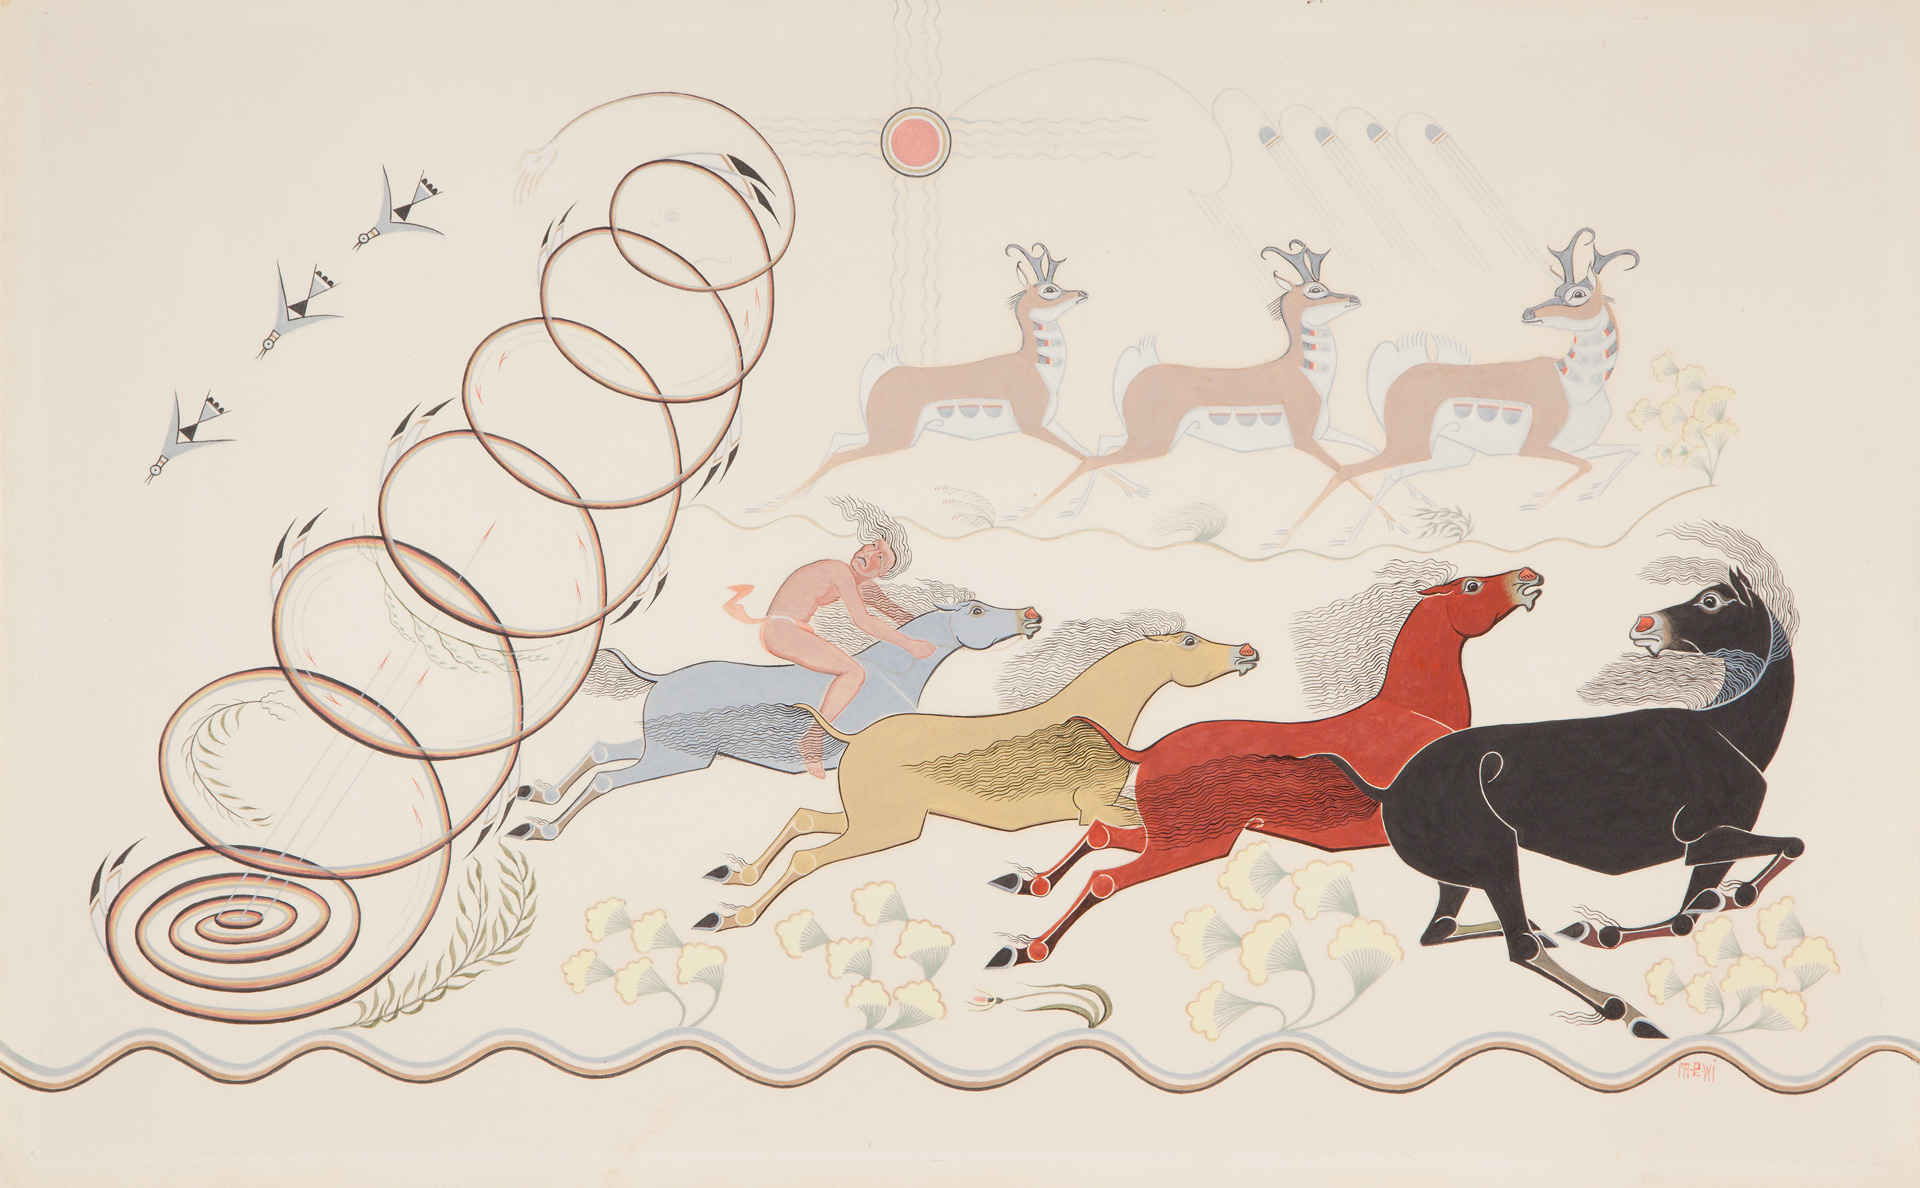 A painting of horses and deer running away from a whirlwind spiral.